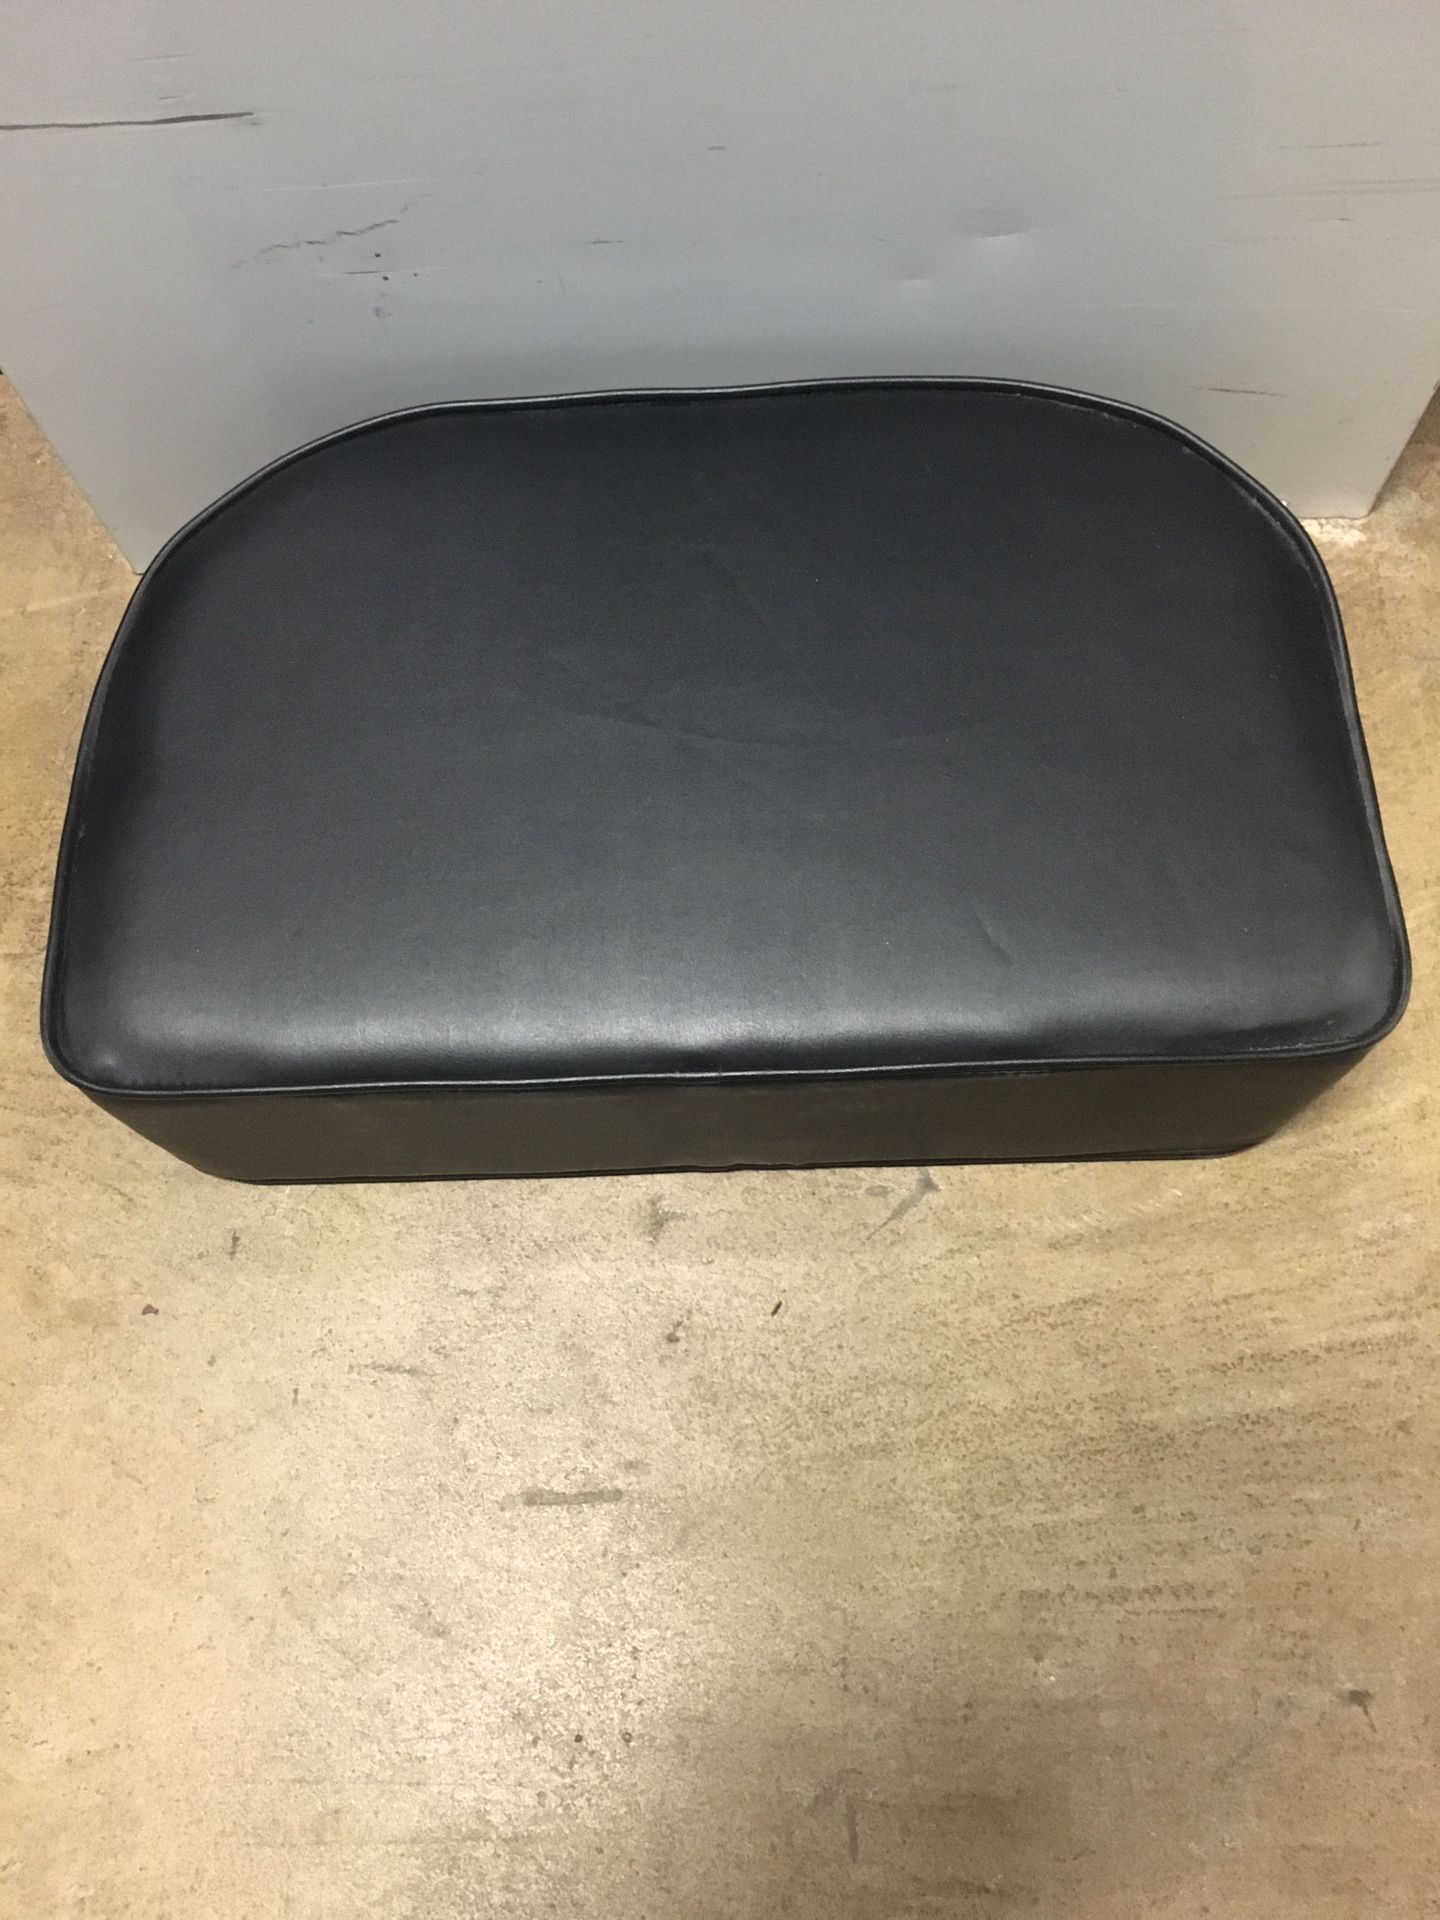 Child styling chair booster seat - price negotiable; no low balling!!!